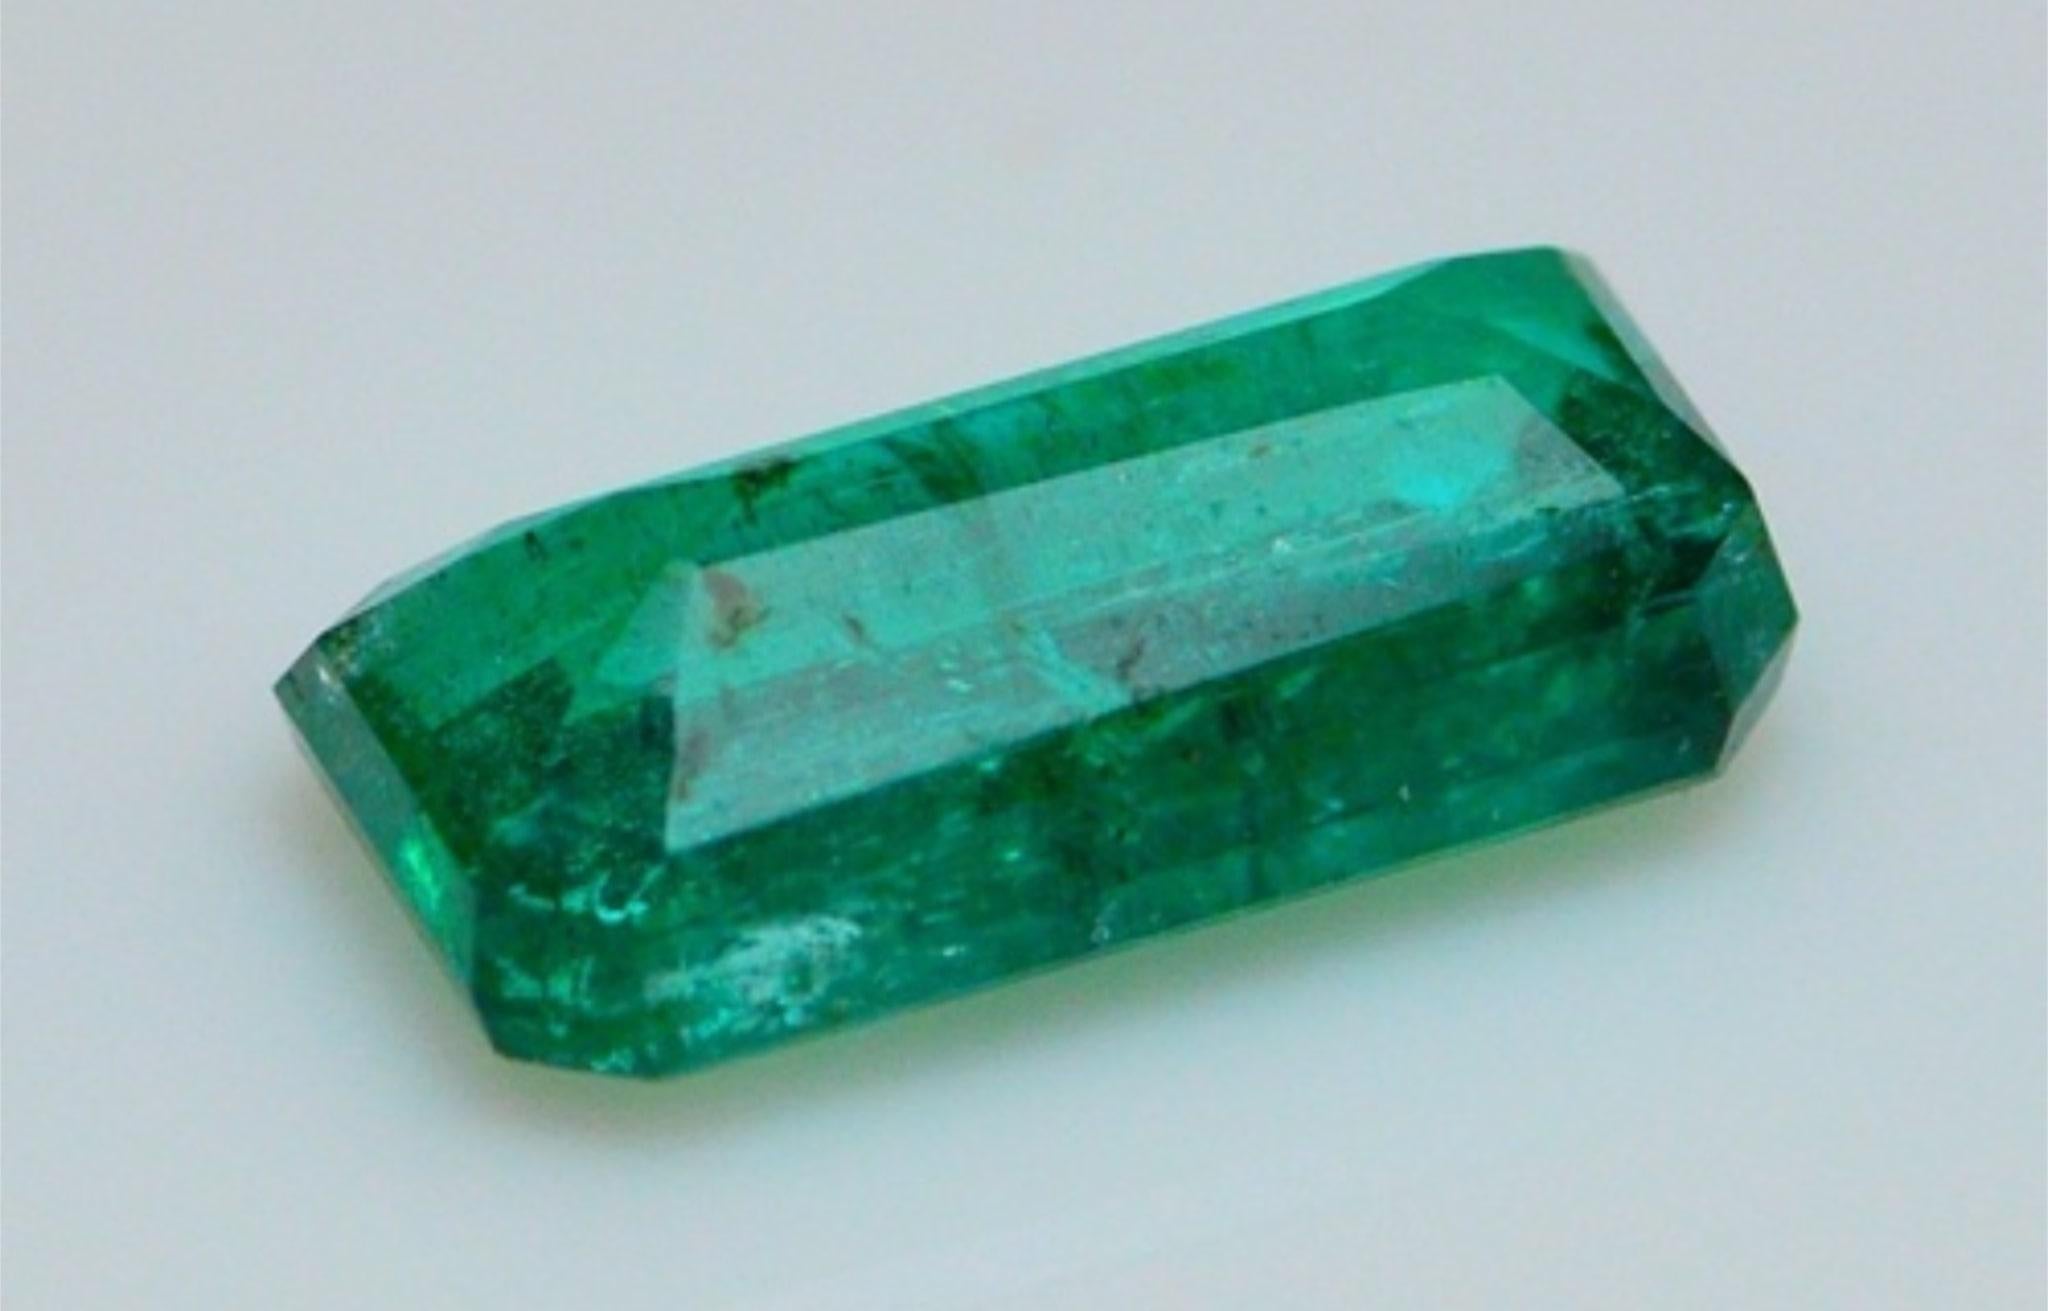 Product Specifications:
Species : Natural Beryl
Variety : Natural Emerald
Shape and Cut : Emerald Cut
Weight : 2.98 Carats
Measurements : 12.17 x 6.51 x 4.51 mm
Color : Green
Transparency : Transparent
Characteristics : Natural Inclusion(s)